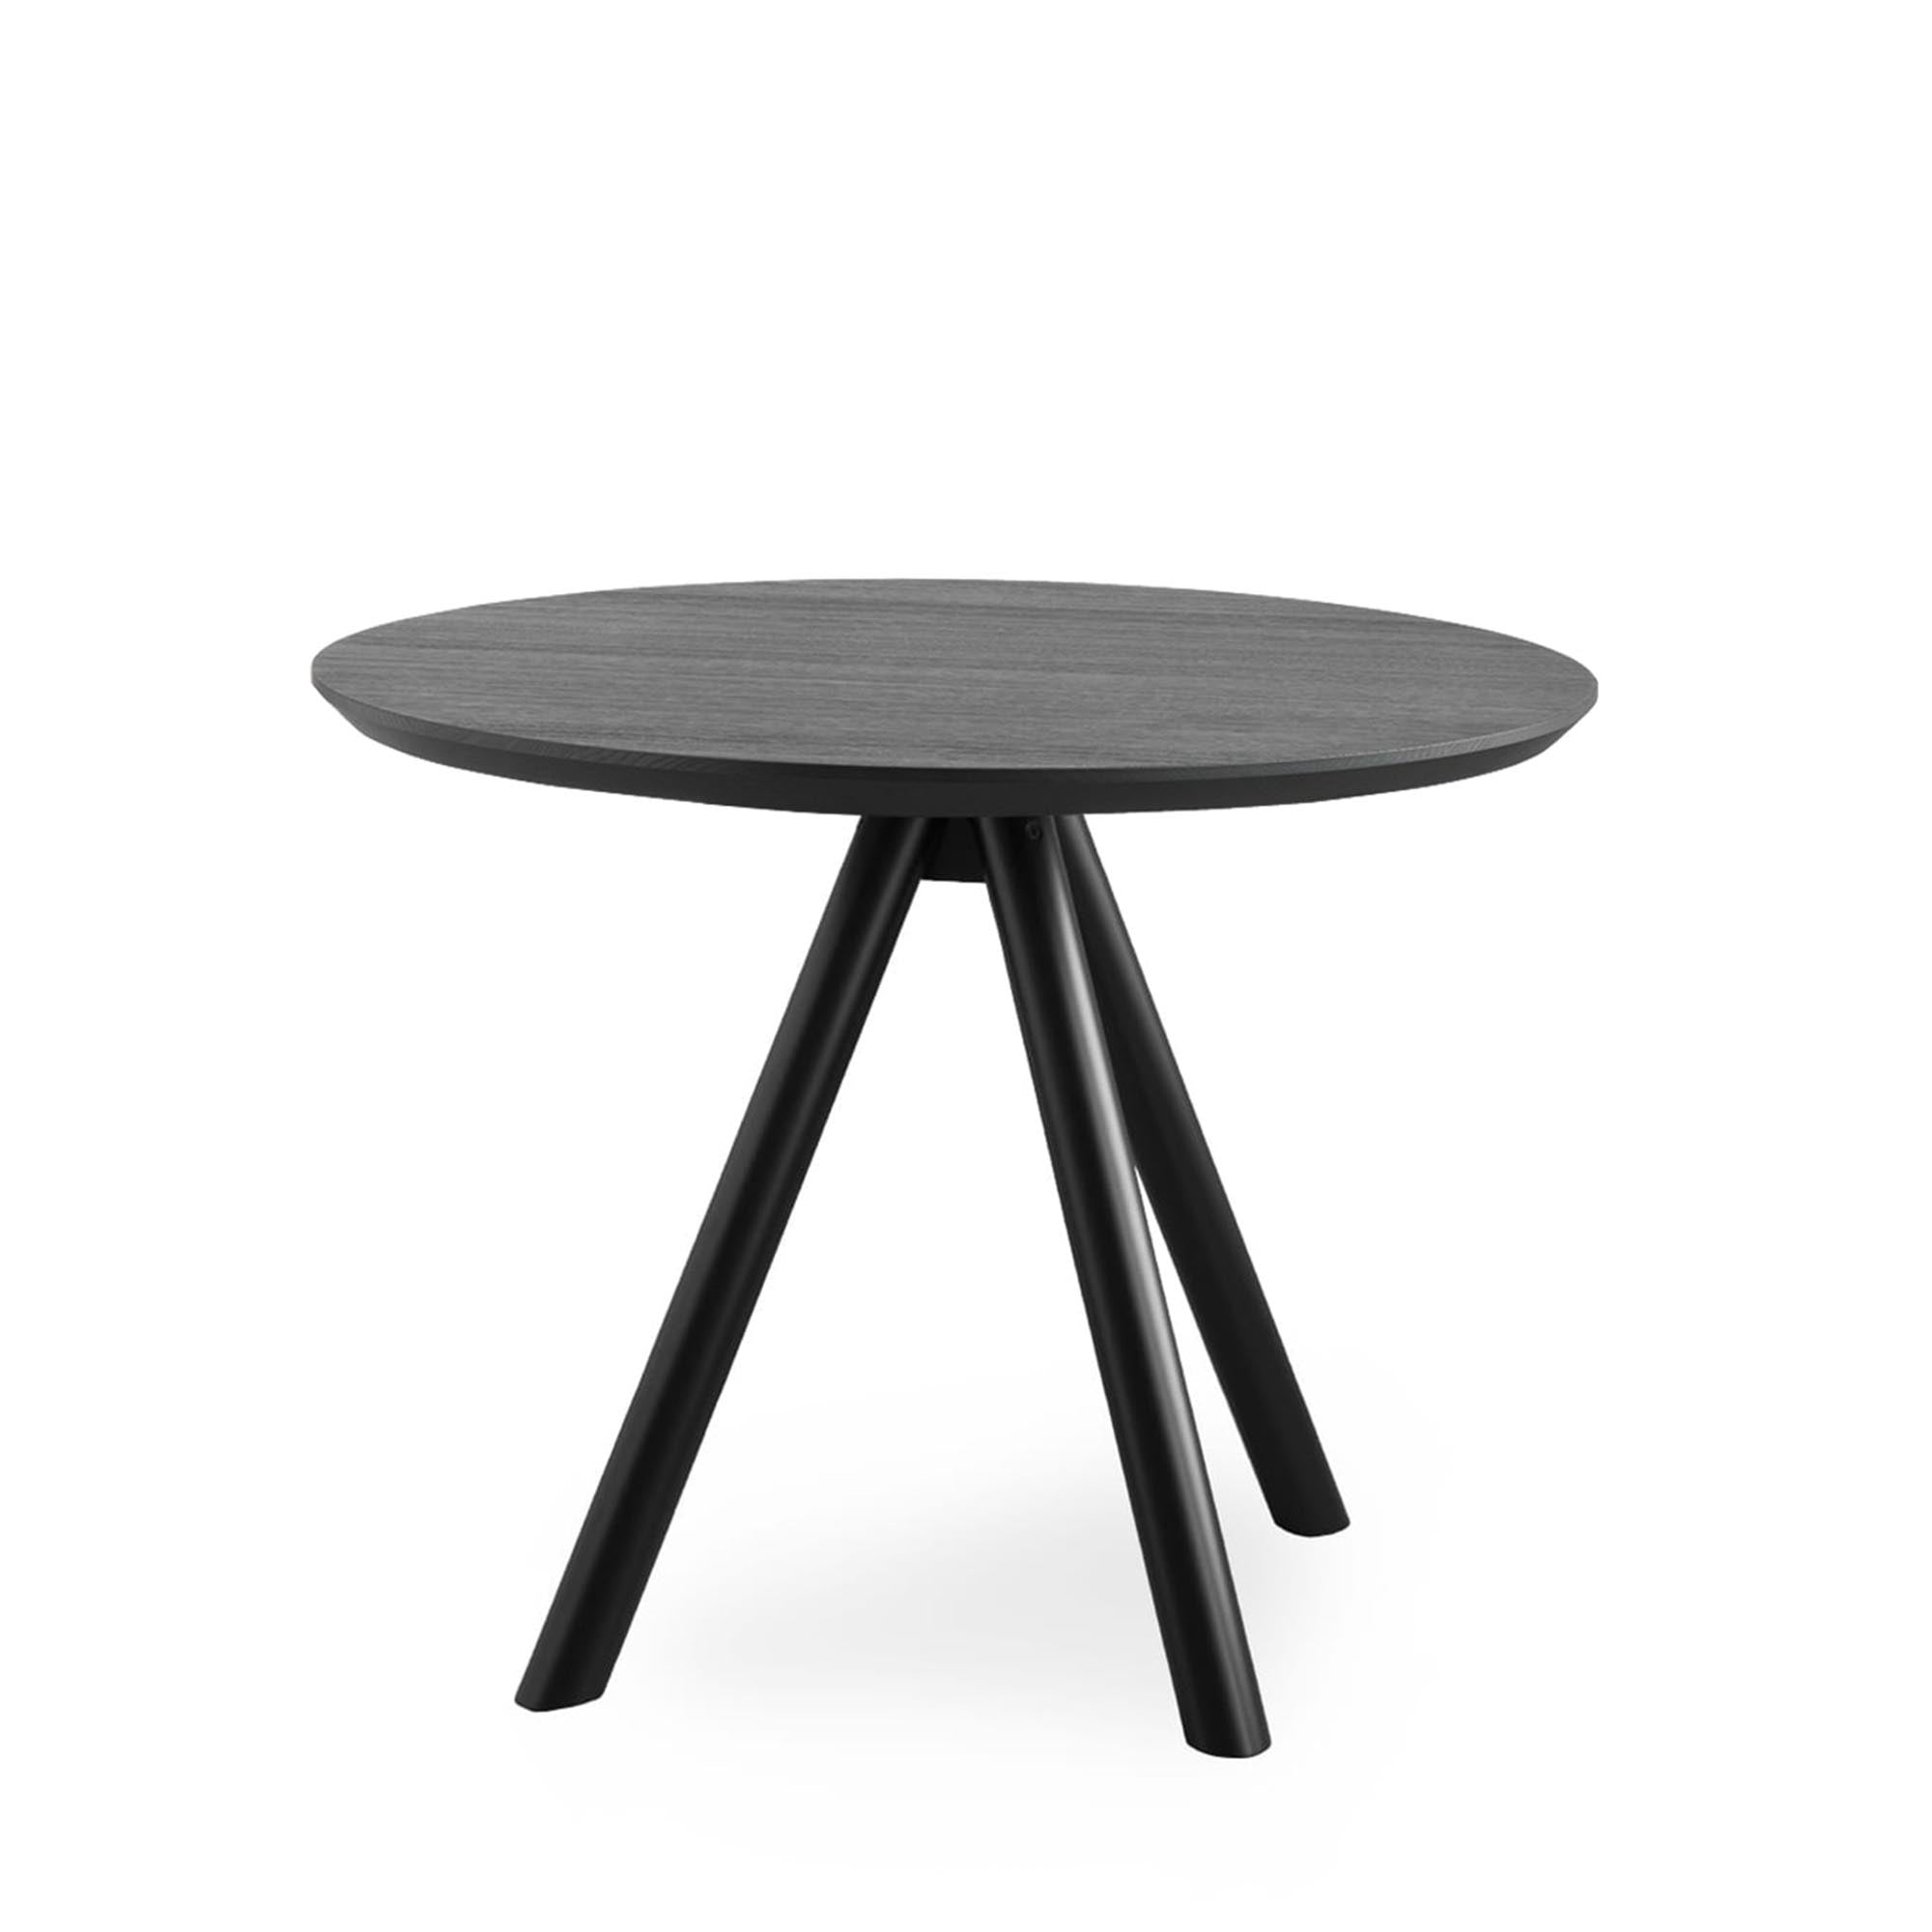 AKY CONTRACT 3 WOOD Table side view beech black white background